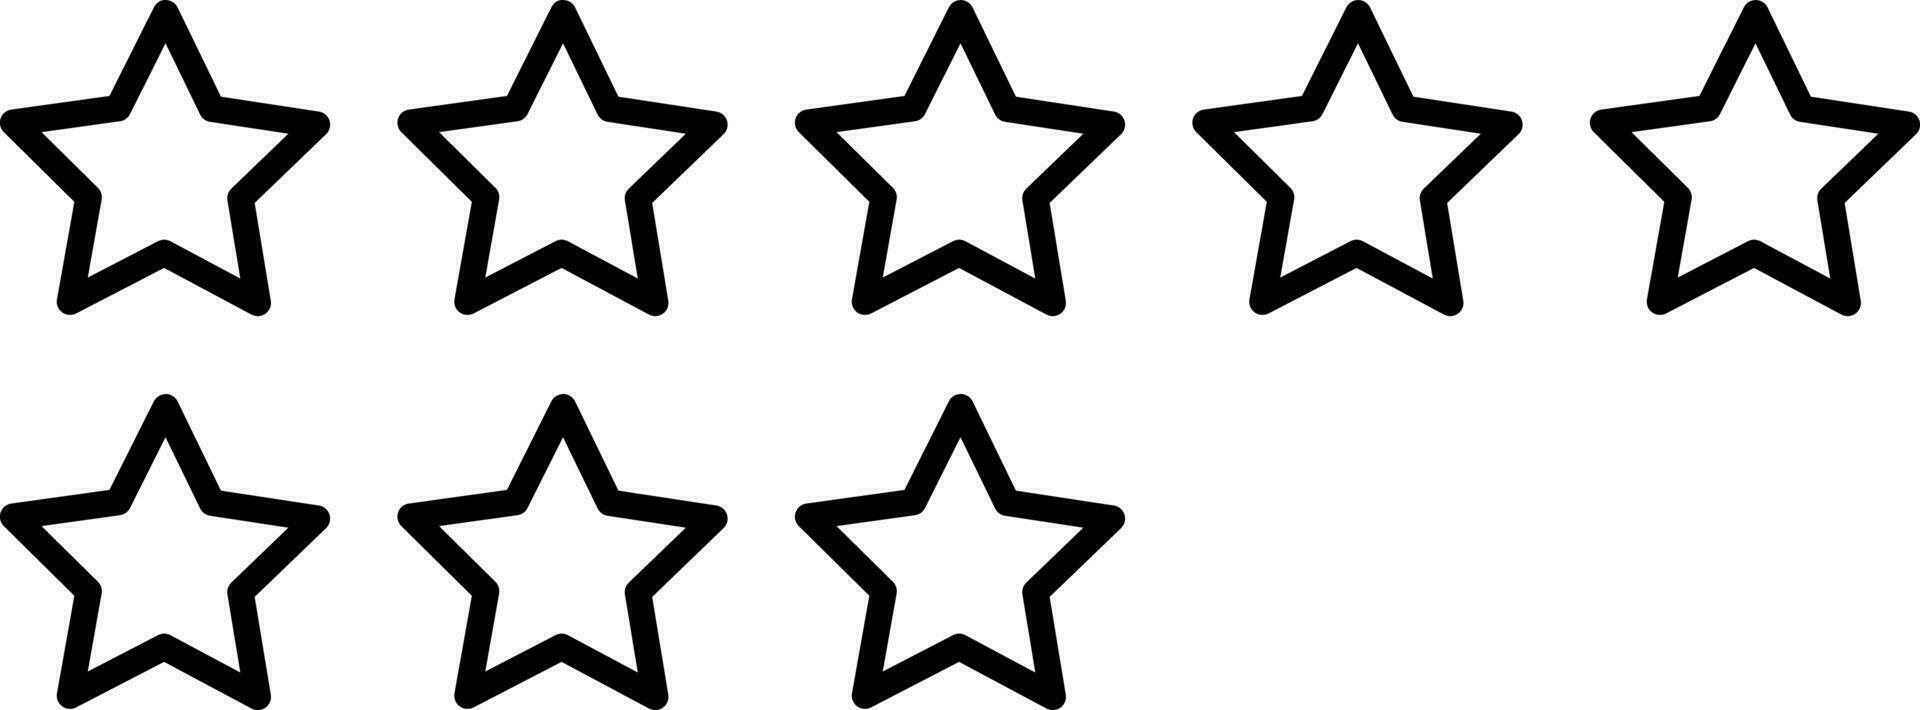 Thin Line Art Of 8 Rating Star Icon. vector